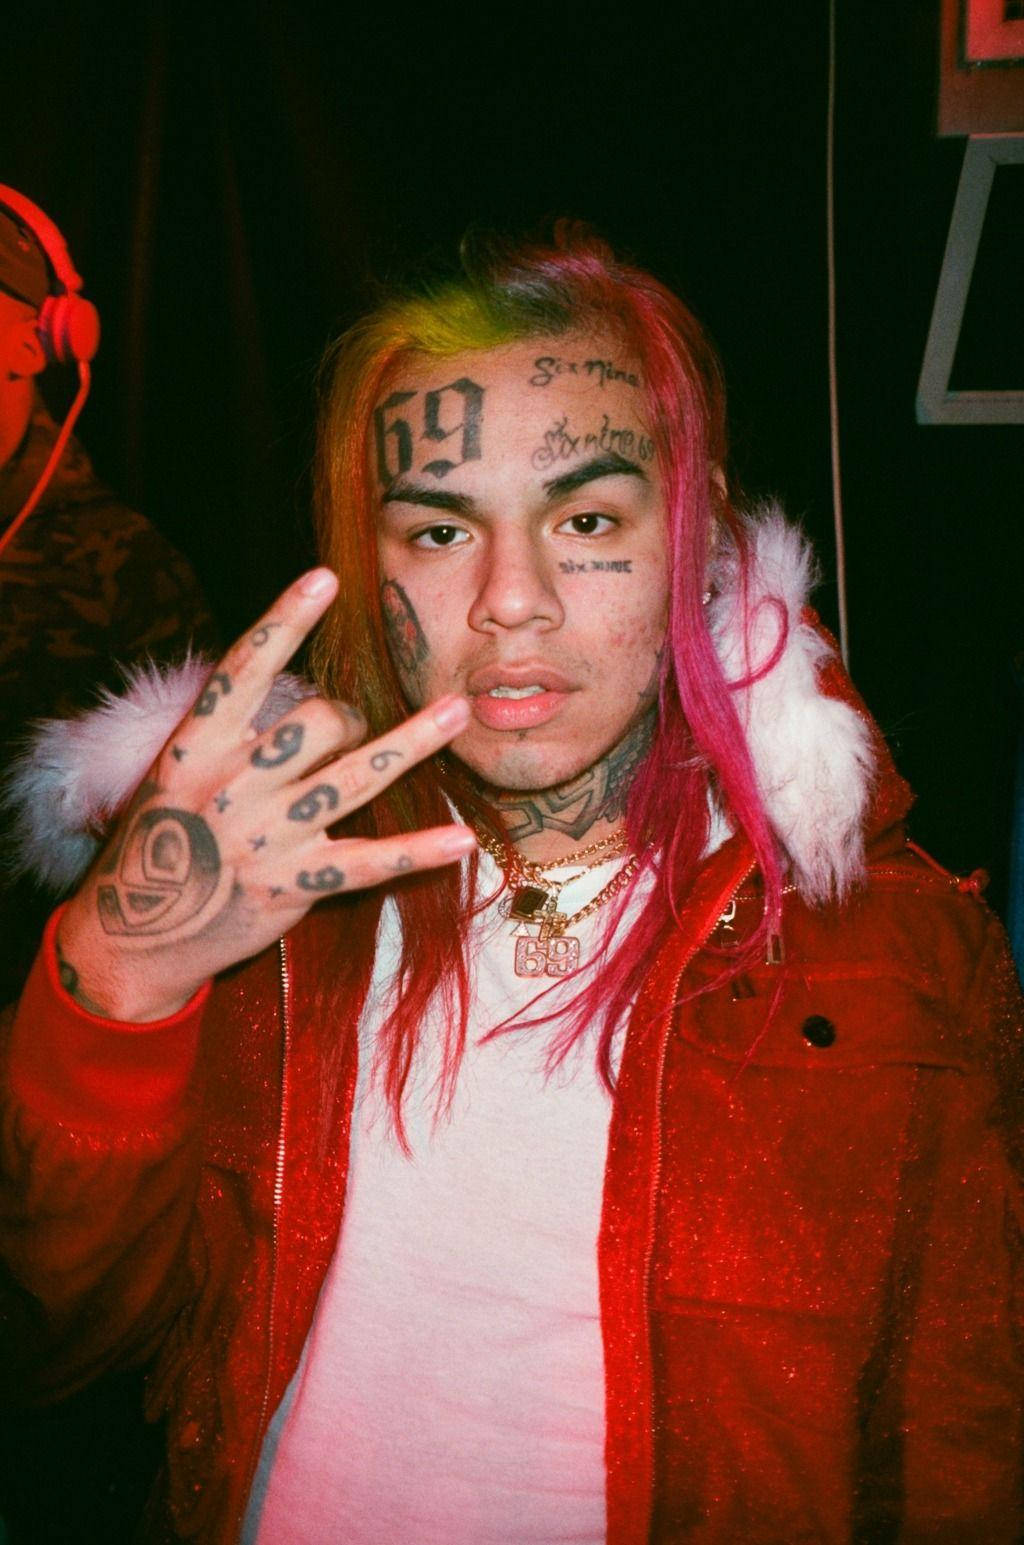 6ix9ine Red Outfit Background